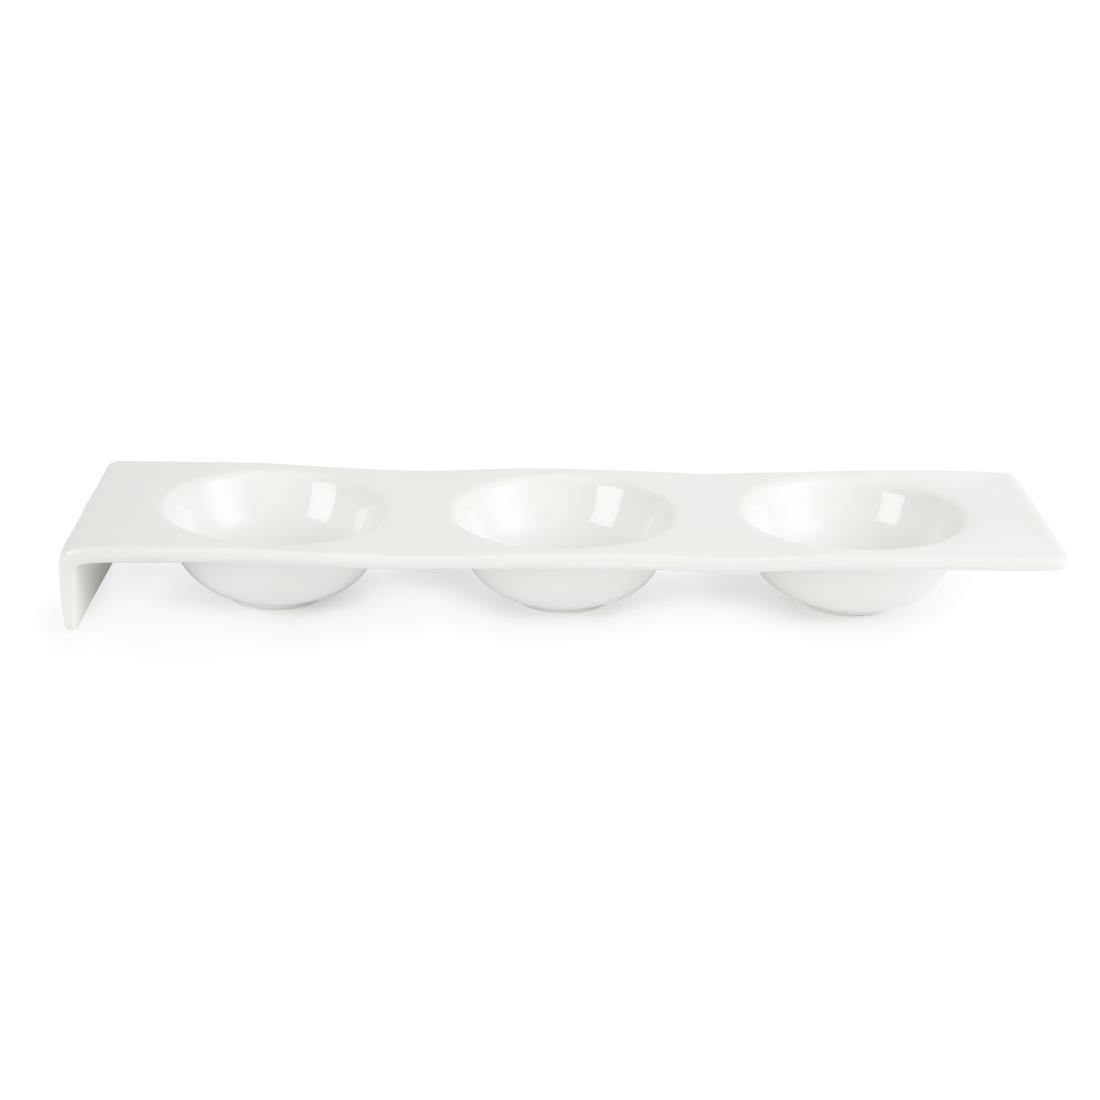 Olympia Whiteware 3 Bowl Dipping Platters 325mm (Pack of 4) - CD734  - 4